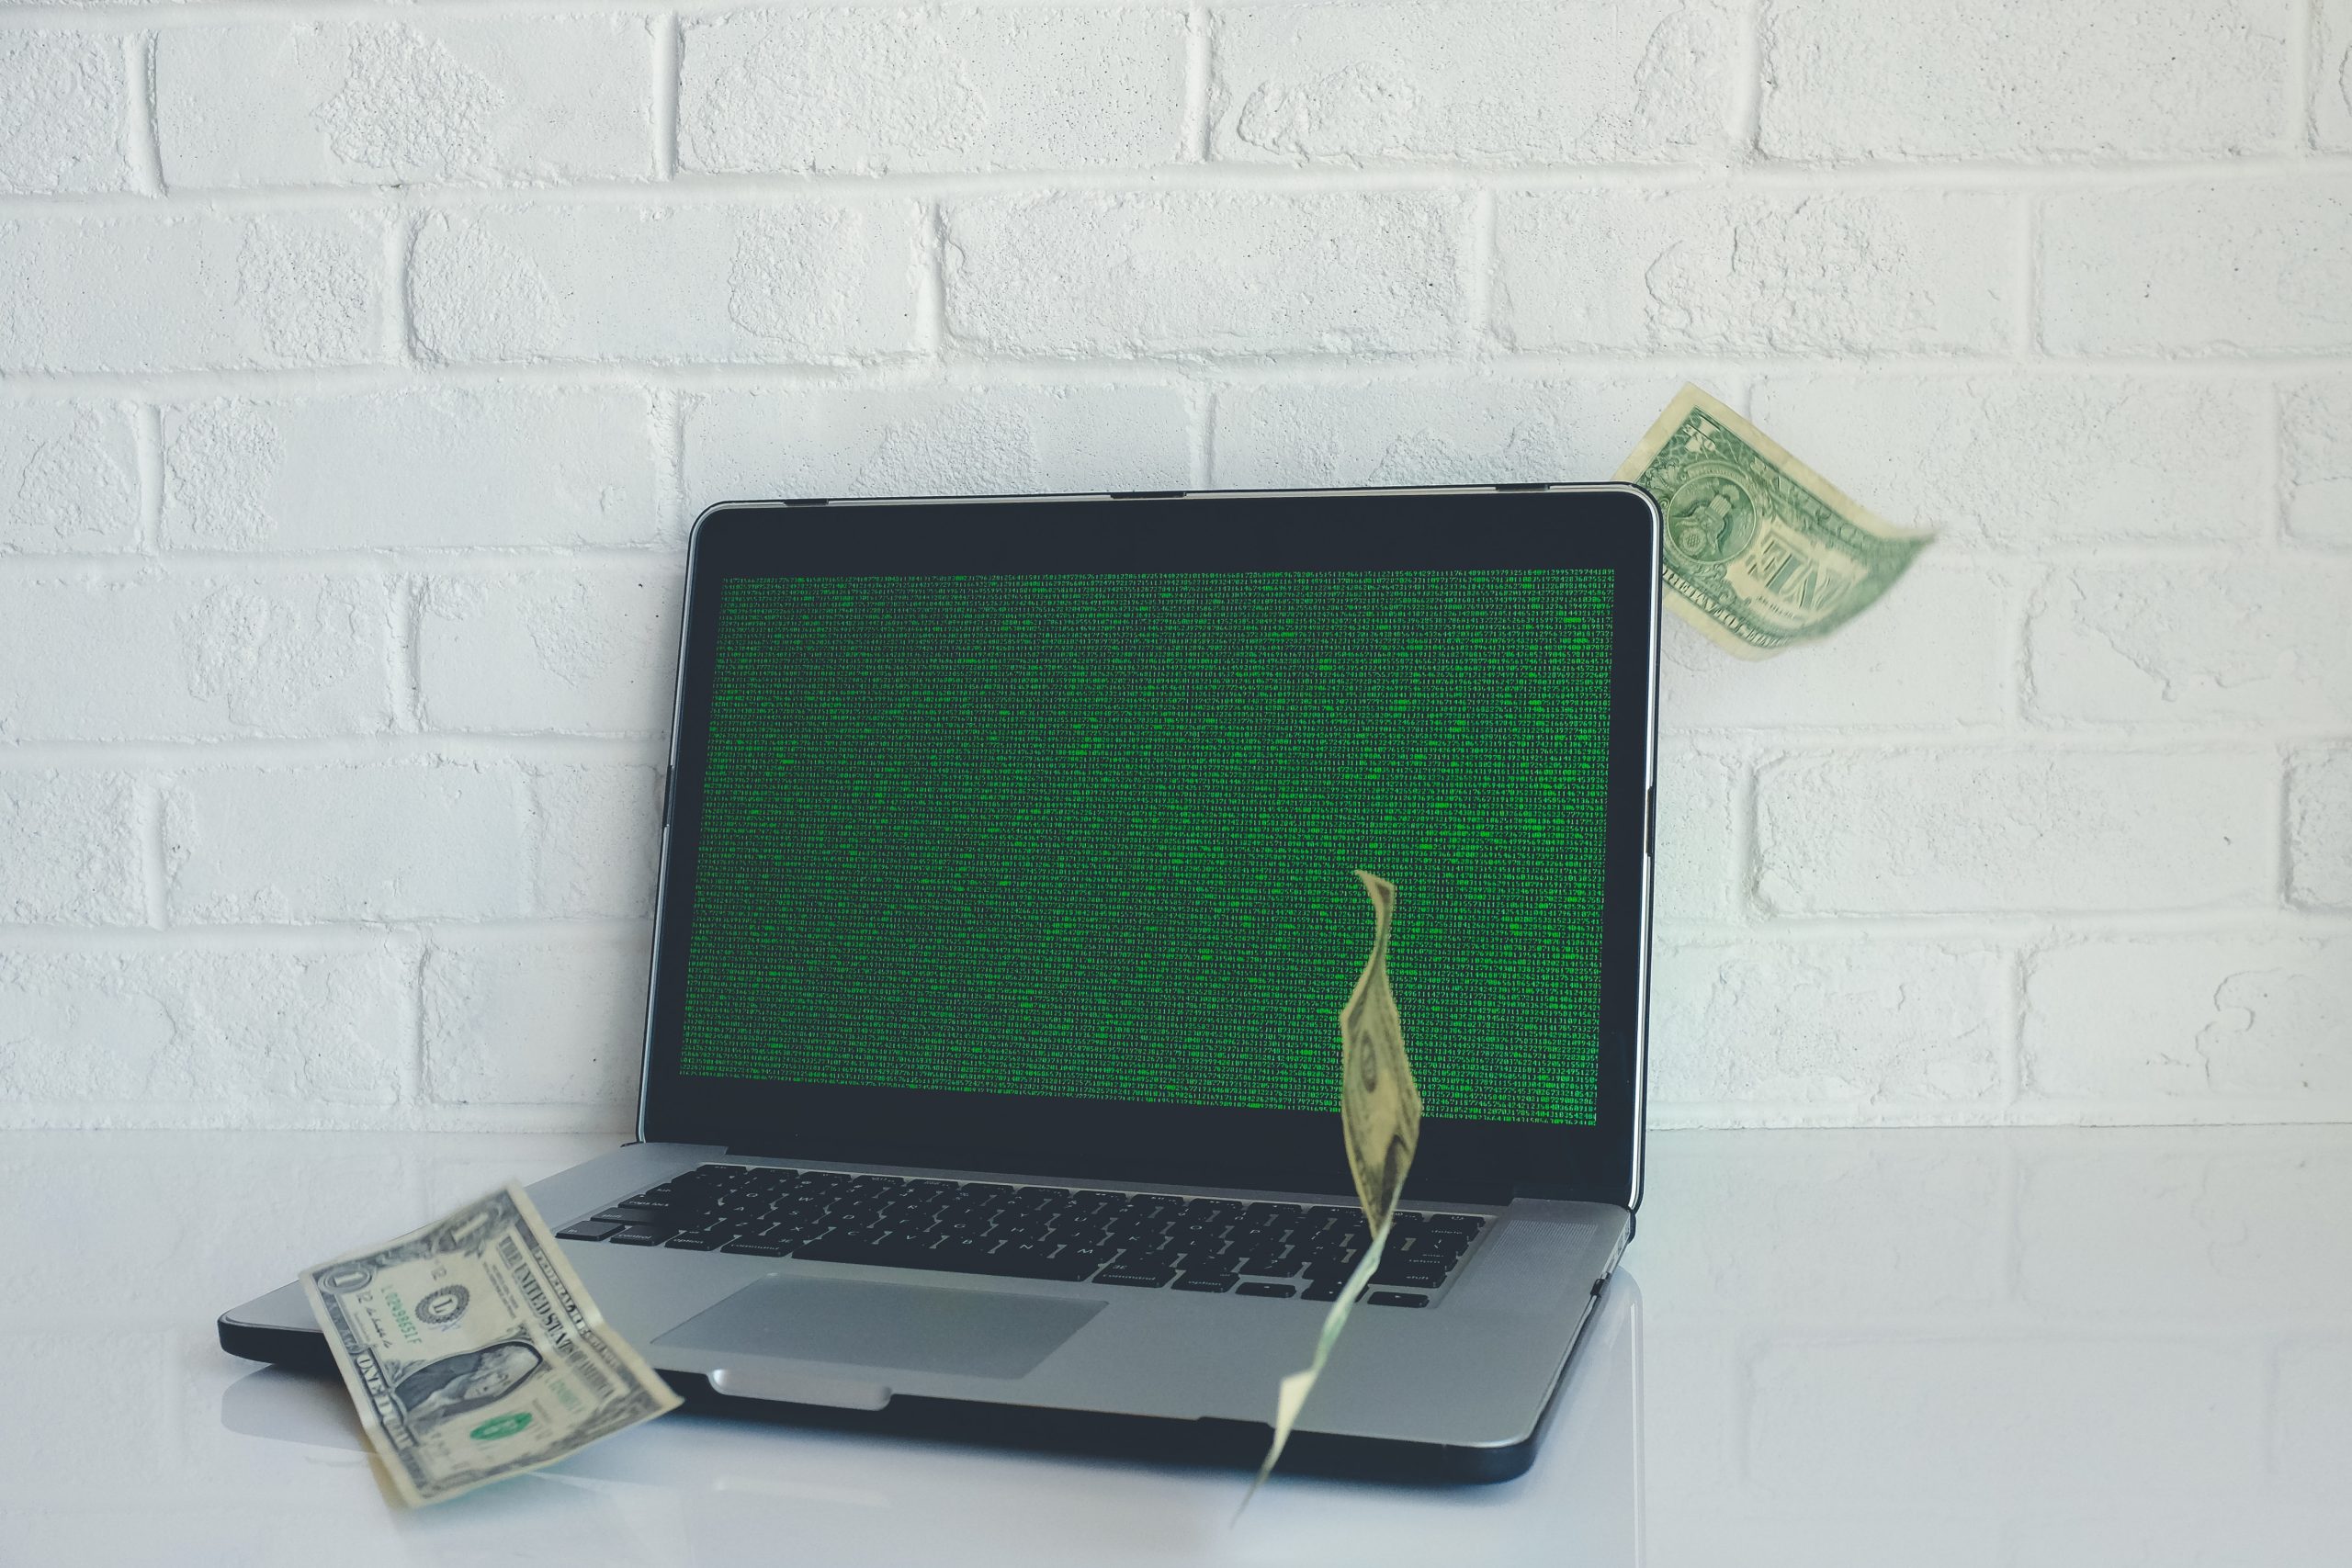 Make money with a computer. Ethical hacking.